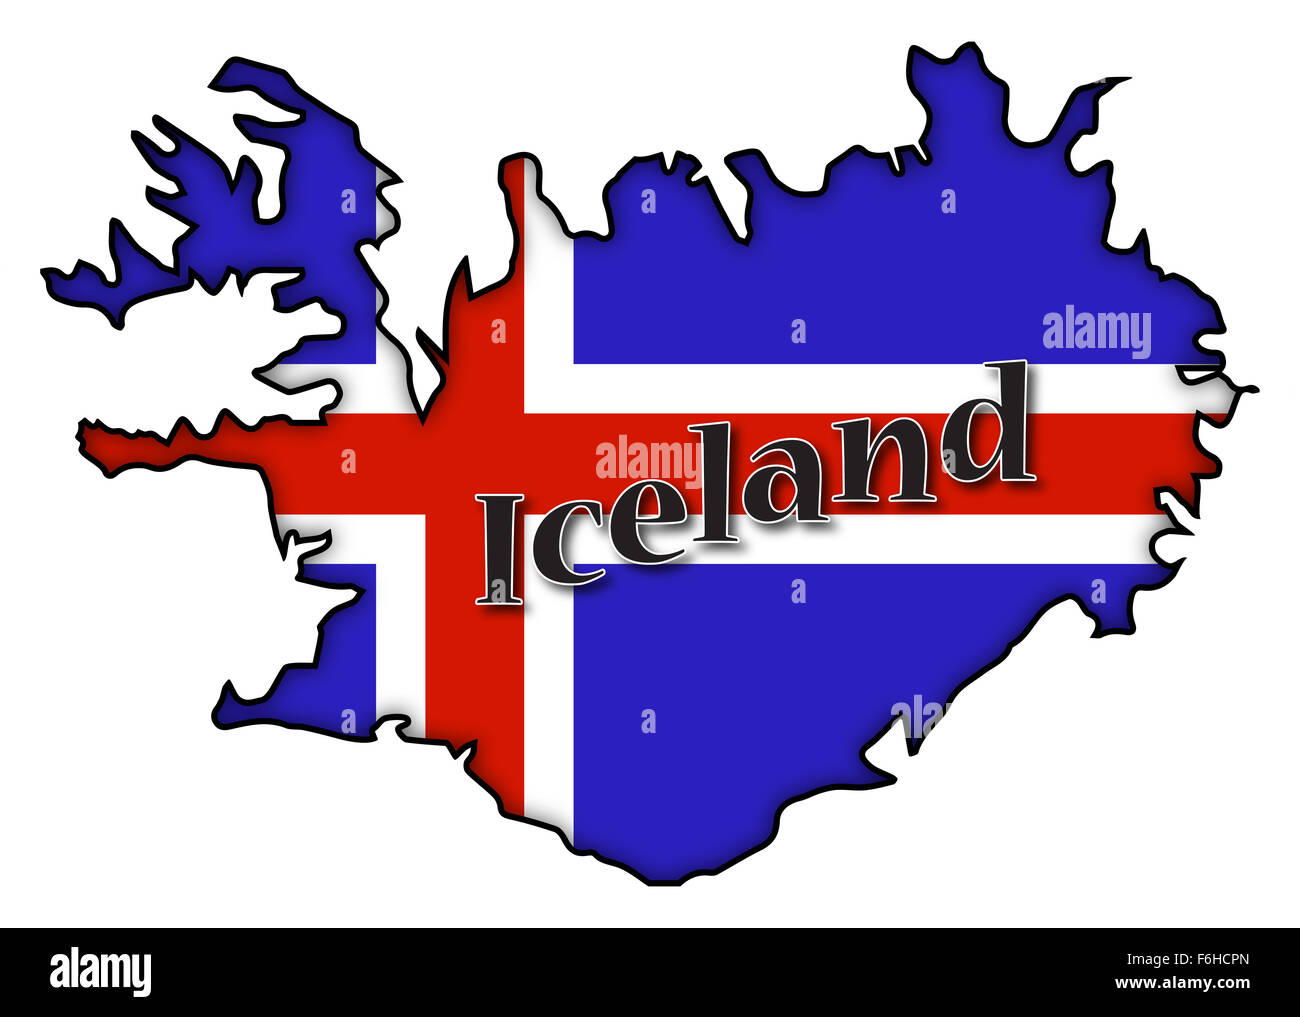 An Iceland flag on a map with text and a shadow isolated on a white background Stock Photo